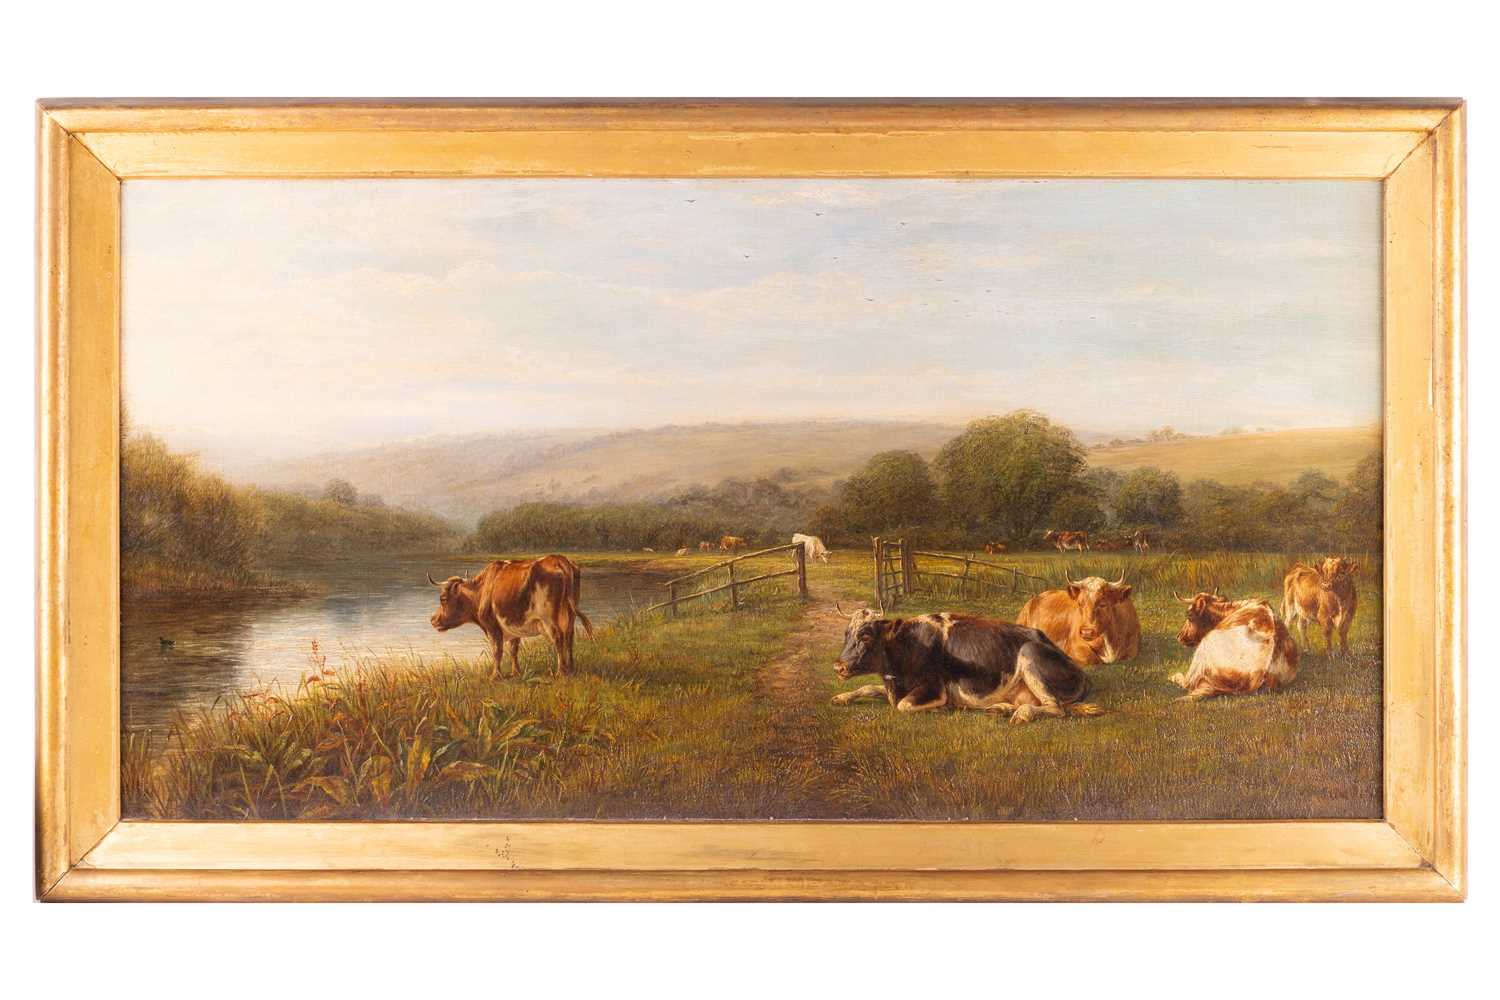 William Luker (1828 - 1905), Landscape with cattle by a river, signed indistinctly 'W. Luker' (lower